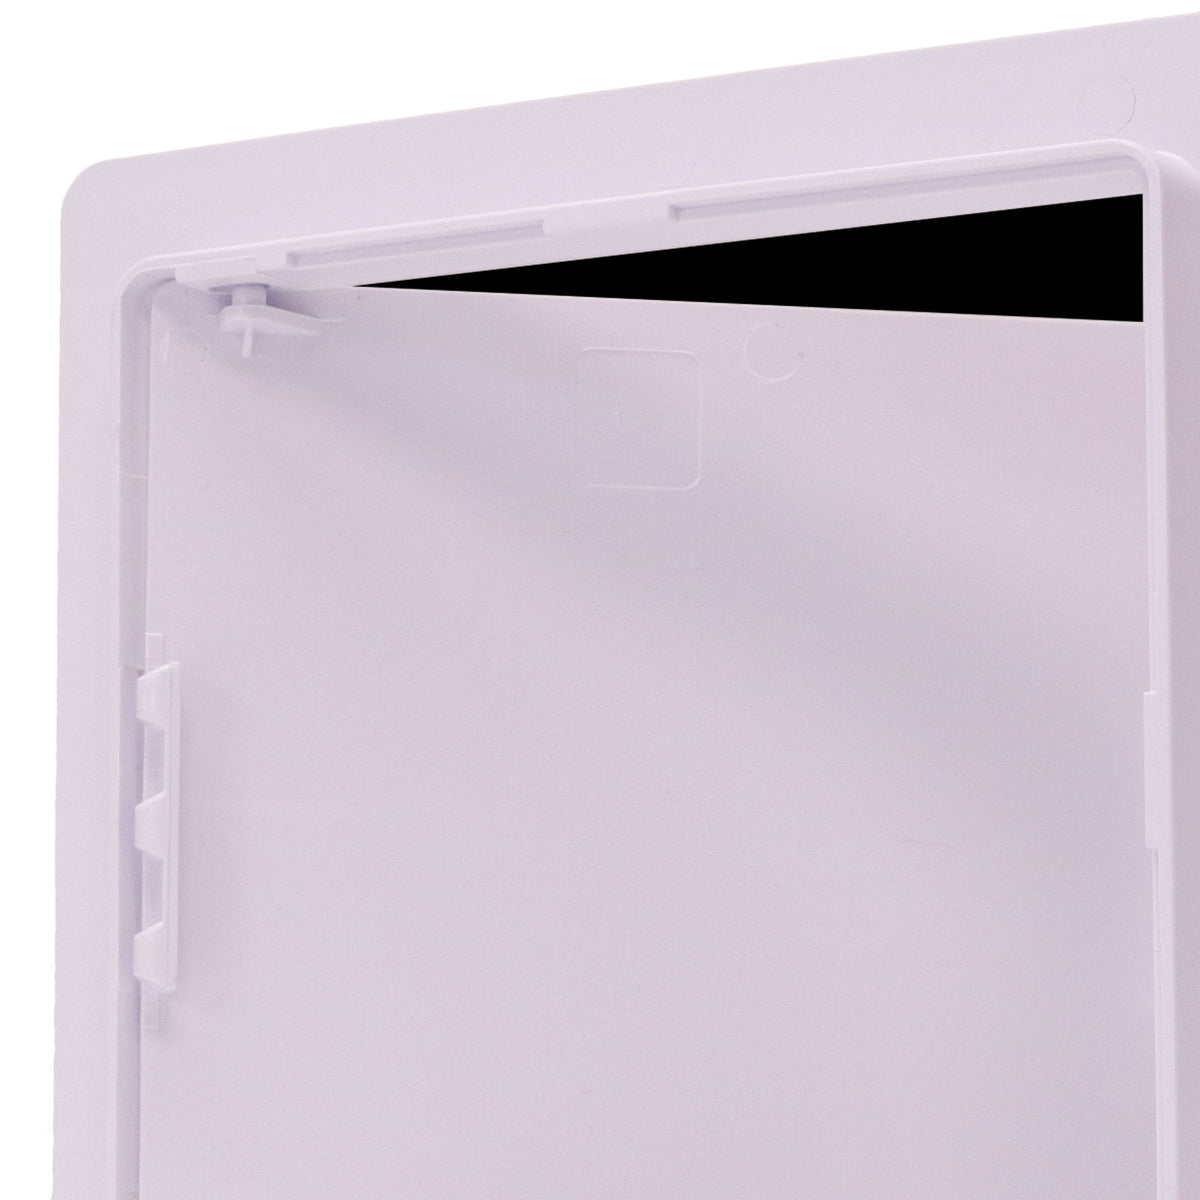 14&quot; X 14&quot; Plastic Access Panel Removeable/Reversable Door With Frame For Concealed Wall / Ceiling Application - [Outer Dimensions: 16&quot; Width X 16&quot; Height]